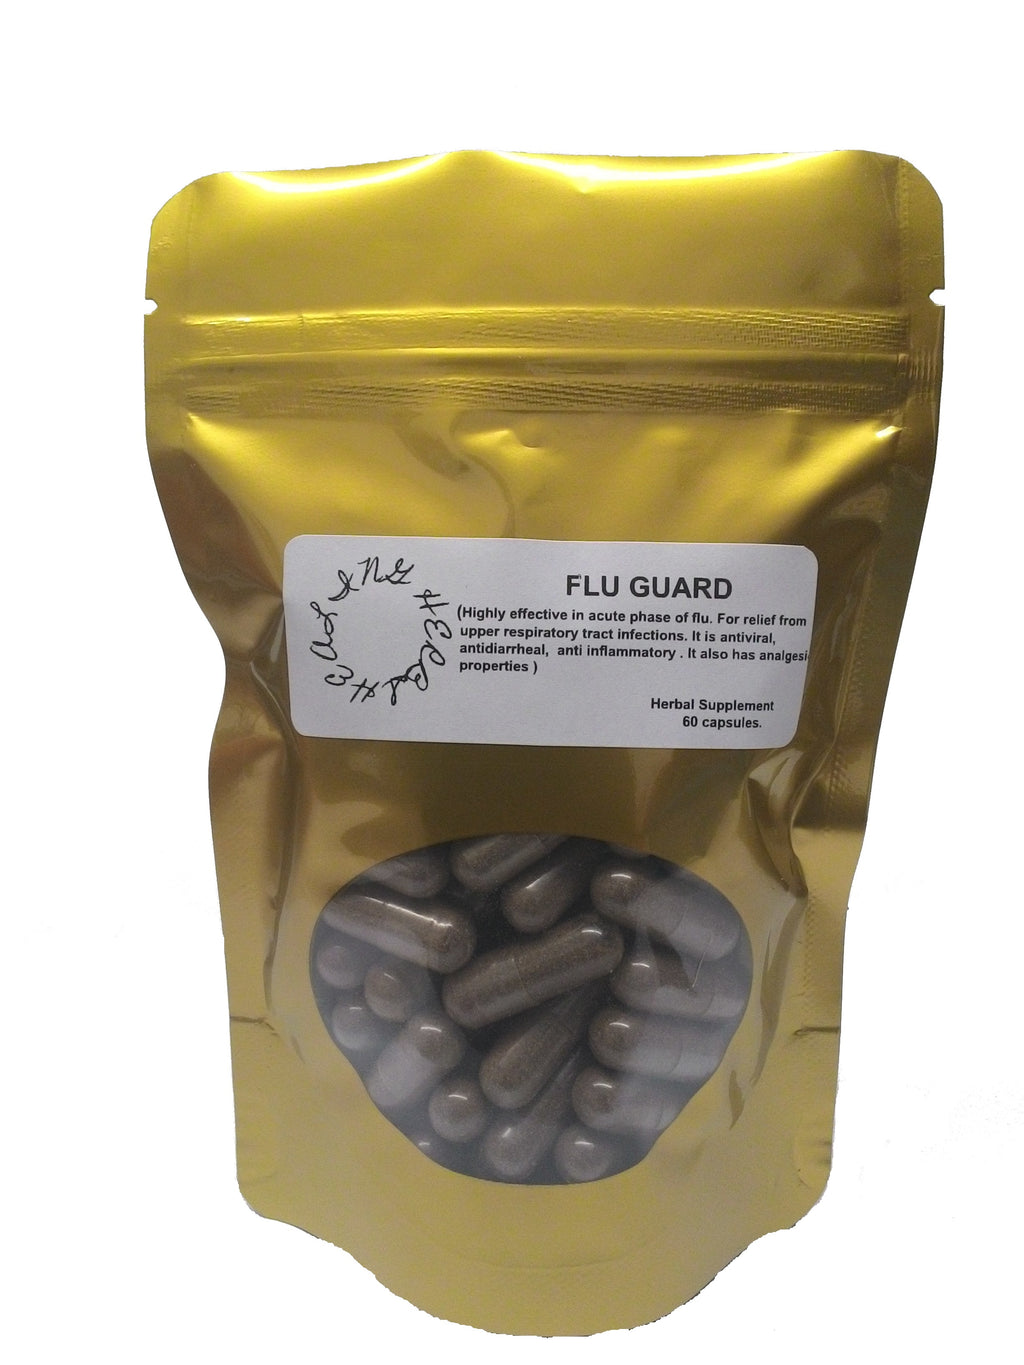 this is the front image of "FLU GUARD" it is highly effective in acute phase of flu, it is antiviral,anti inflammatory,has analgesic properties